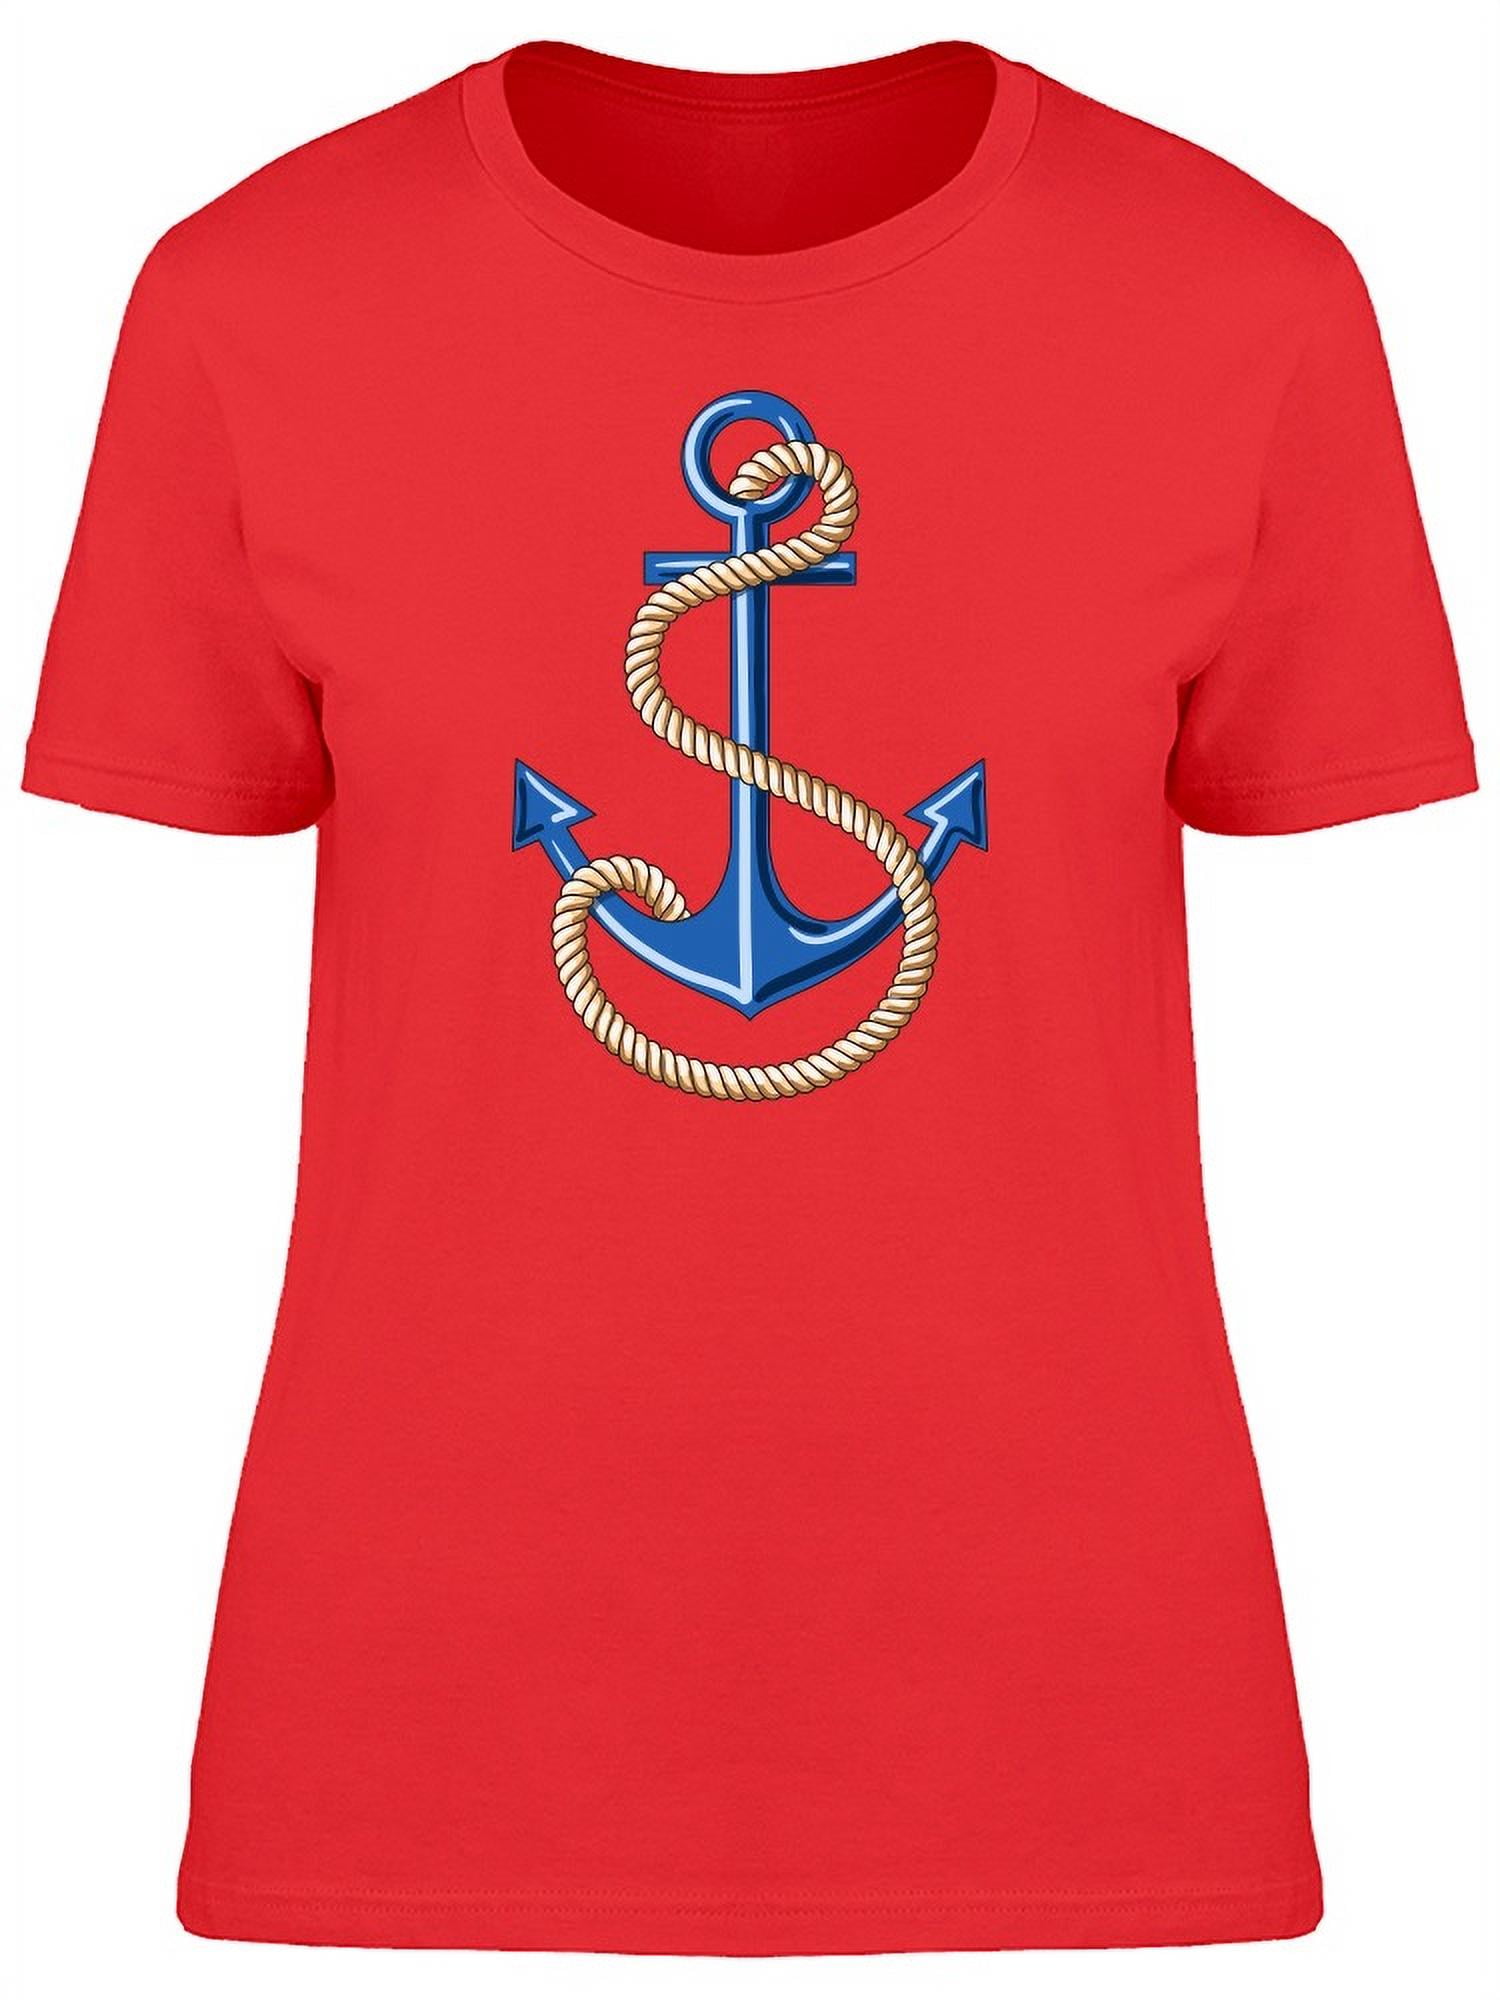 Cool Sailor Anchor Doodle T-Shirt Women -Image by Shutterstock, Female ...